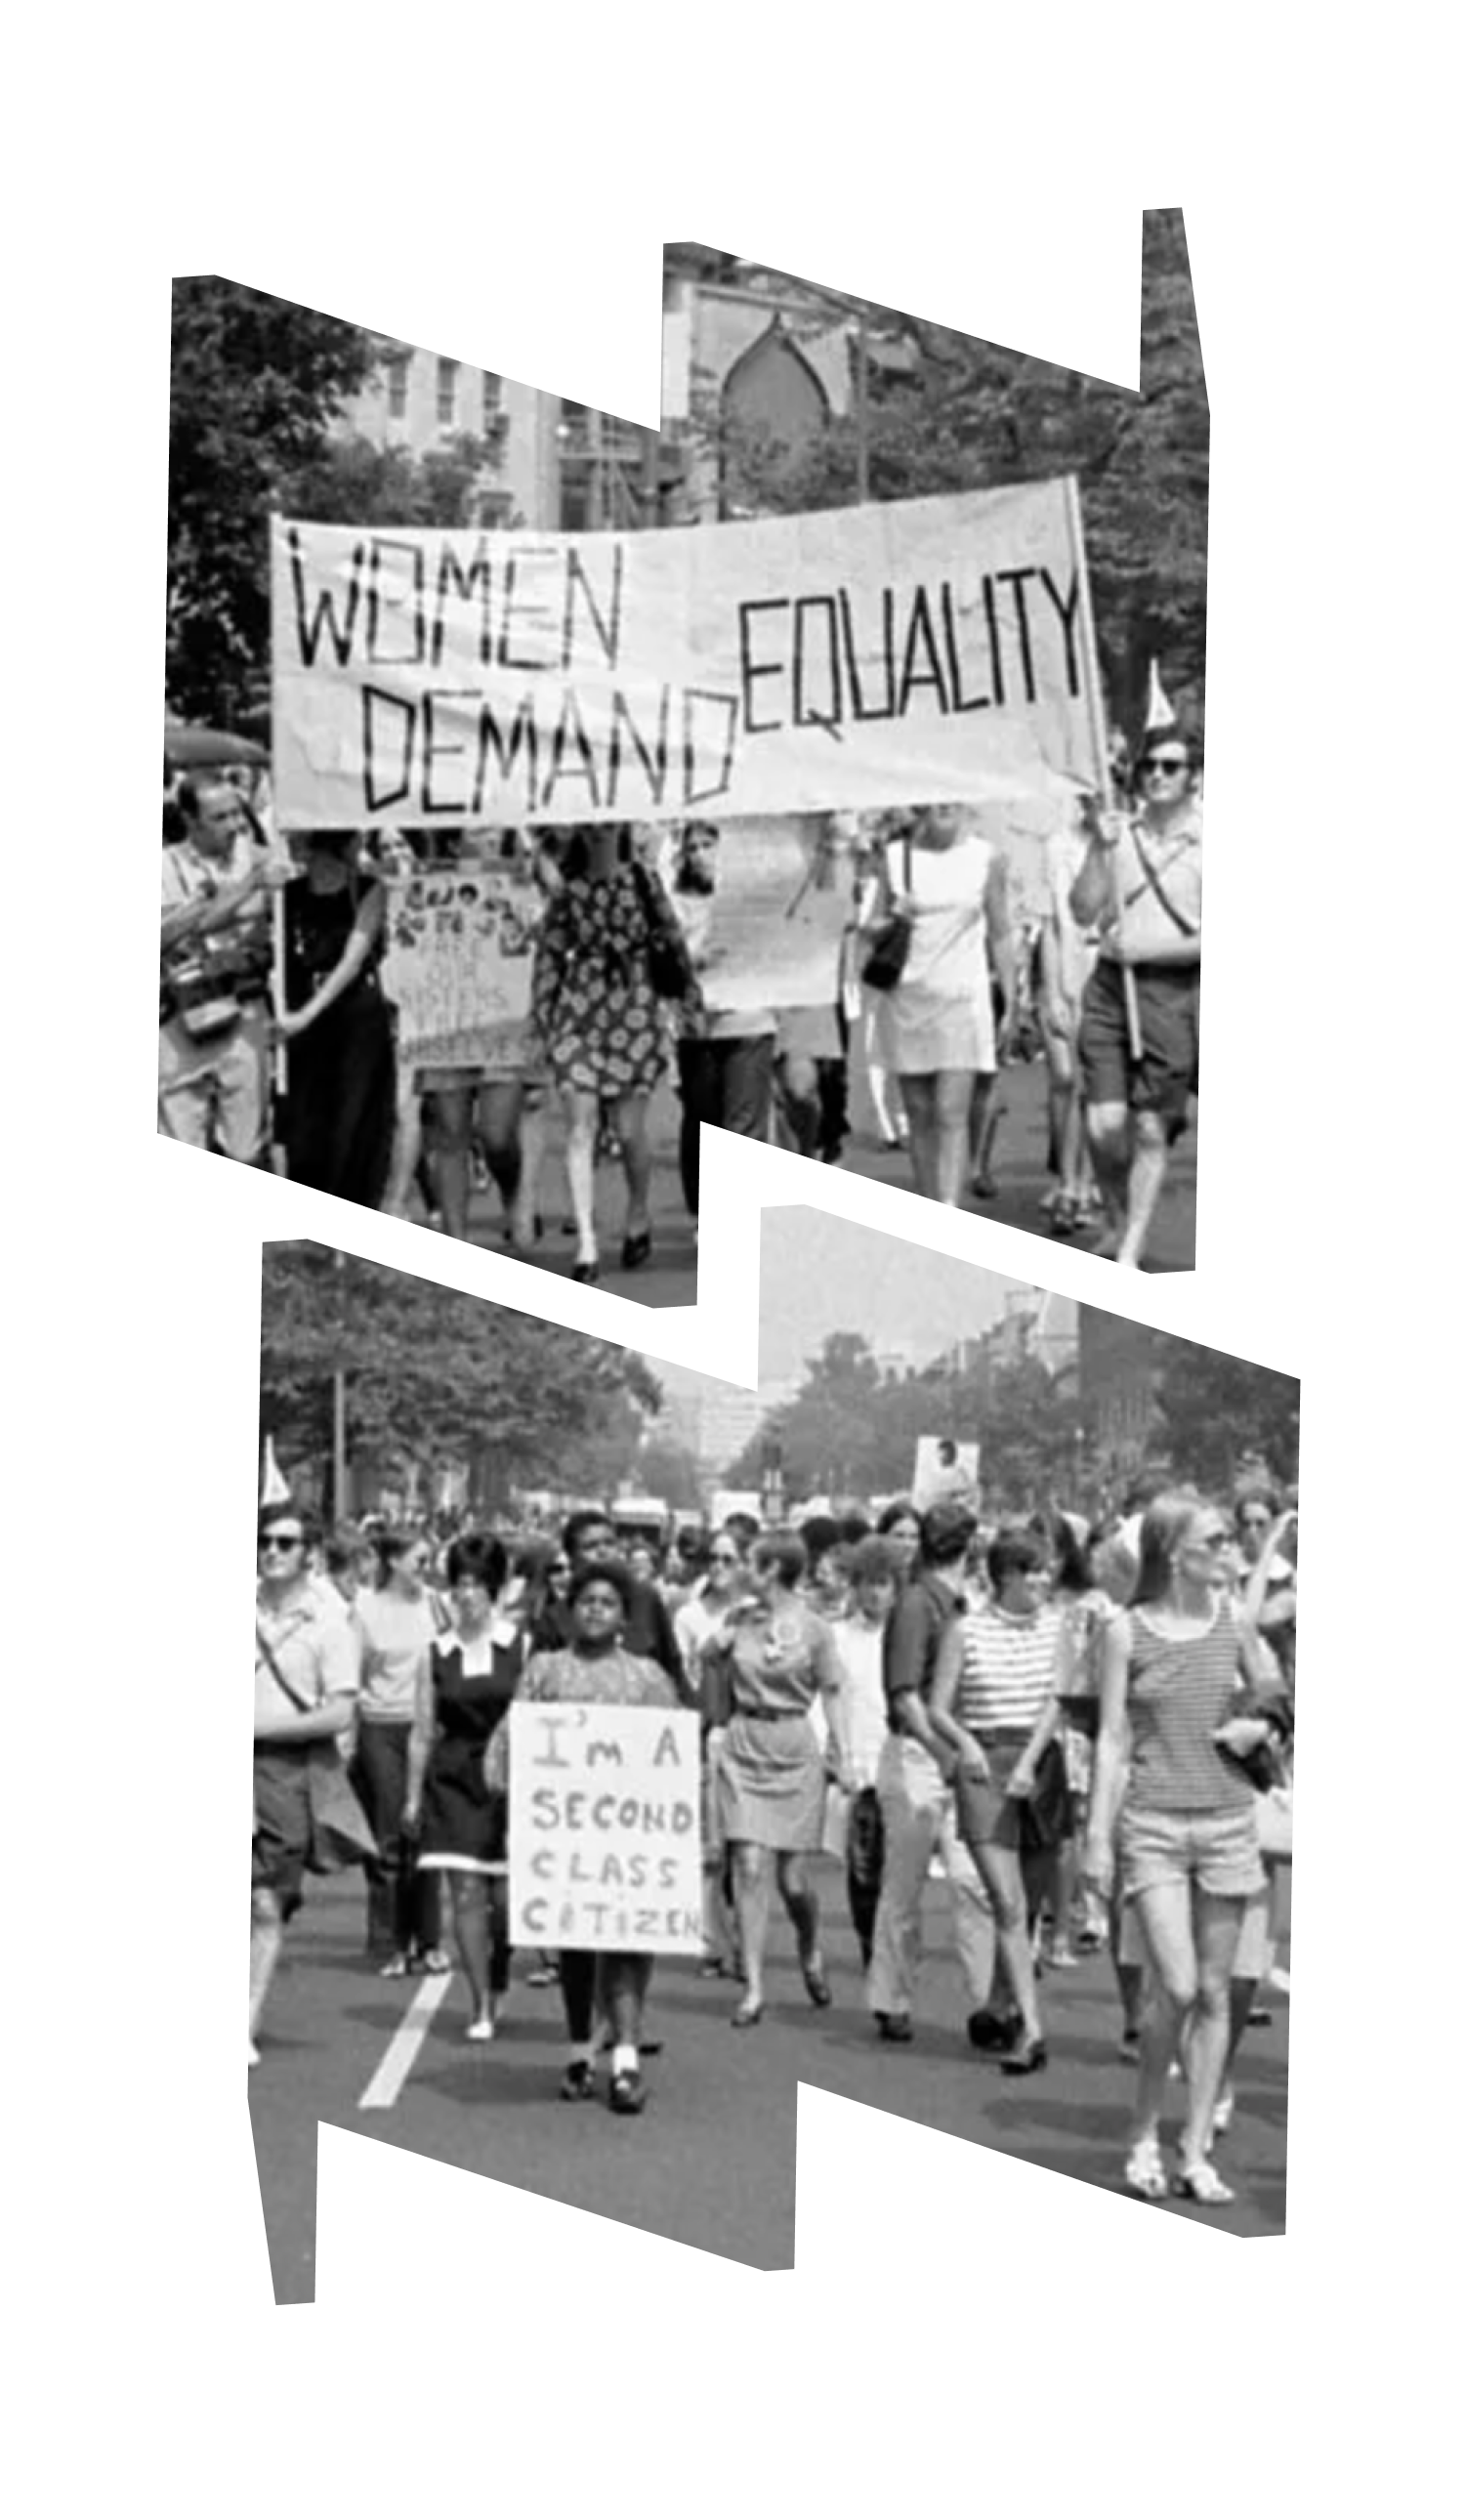 Black and white image of women's liberation march in Washigton, DC from Farrugut Square to Layfette Park, 1970. Image sits inside and spans a W and M frame.  Top image has women holding sign that says "Women Demand Equality."  Bottom image has woman holding sign that says "I'm a second class citizen."